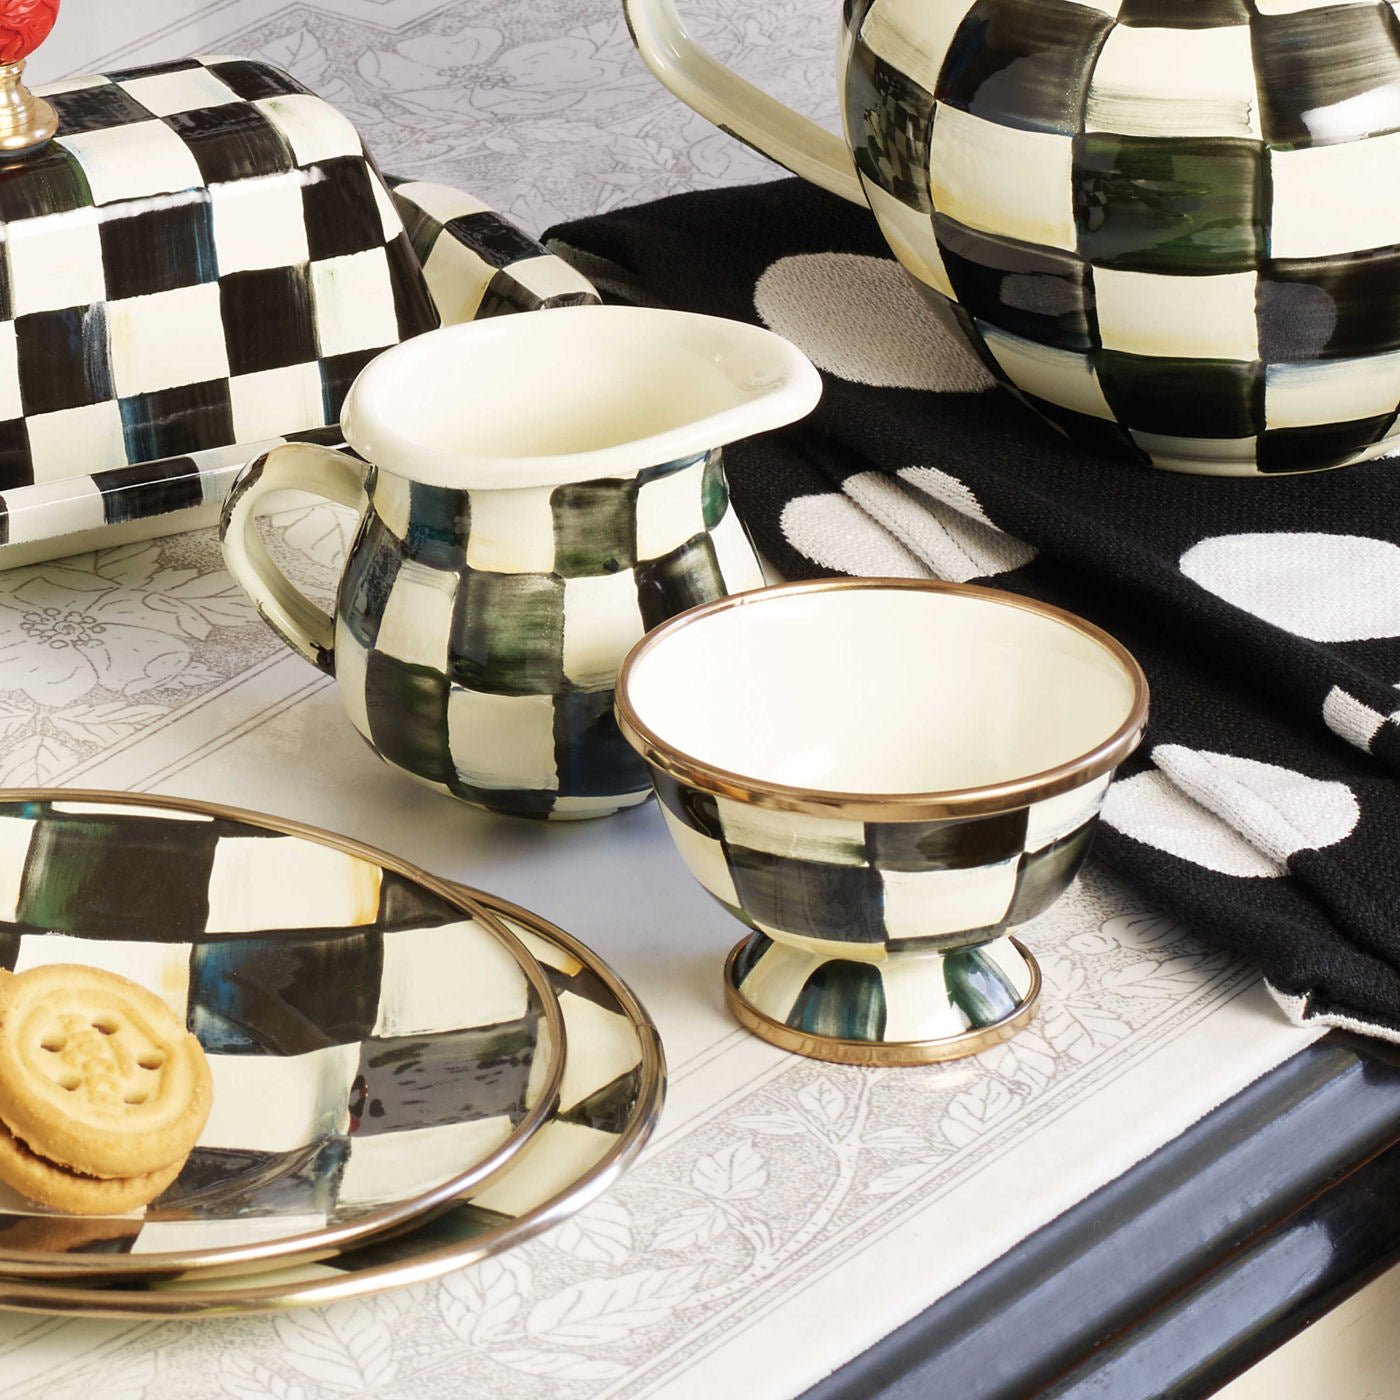 MacKenzie-Childs Courtly Check Little Creamer - |VESIMI Design| Luxury Bathrooms and Home Decor